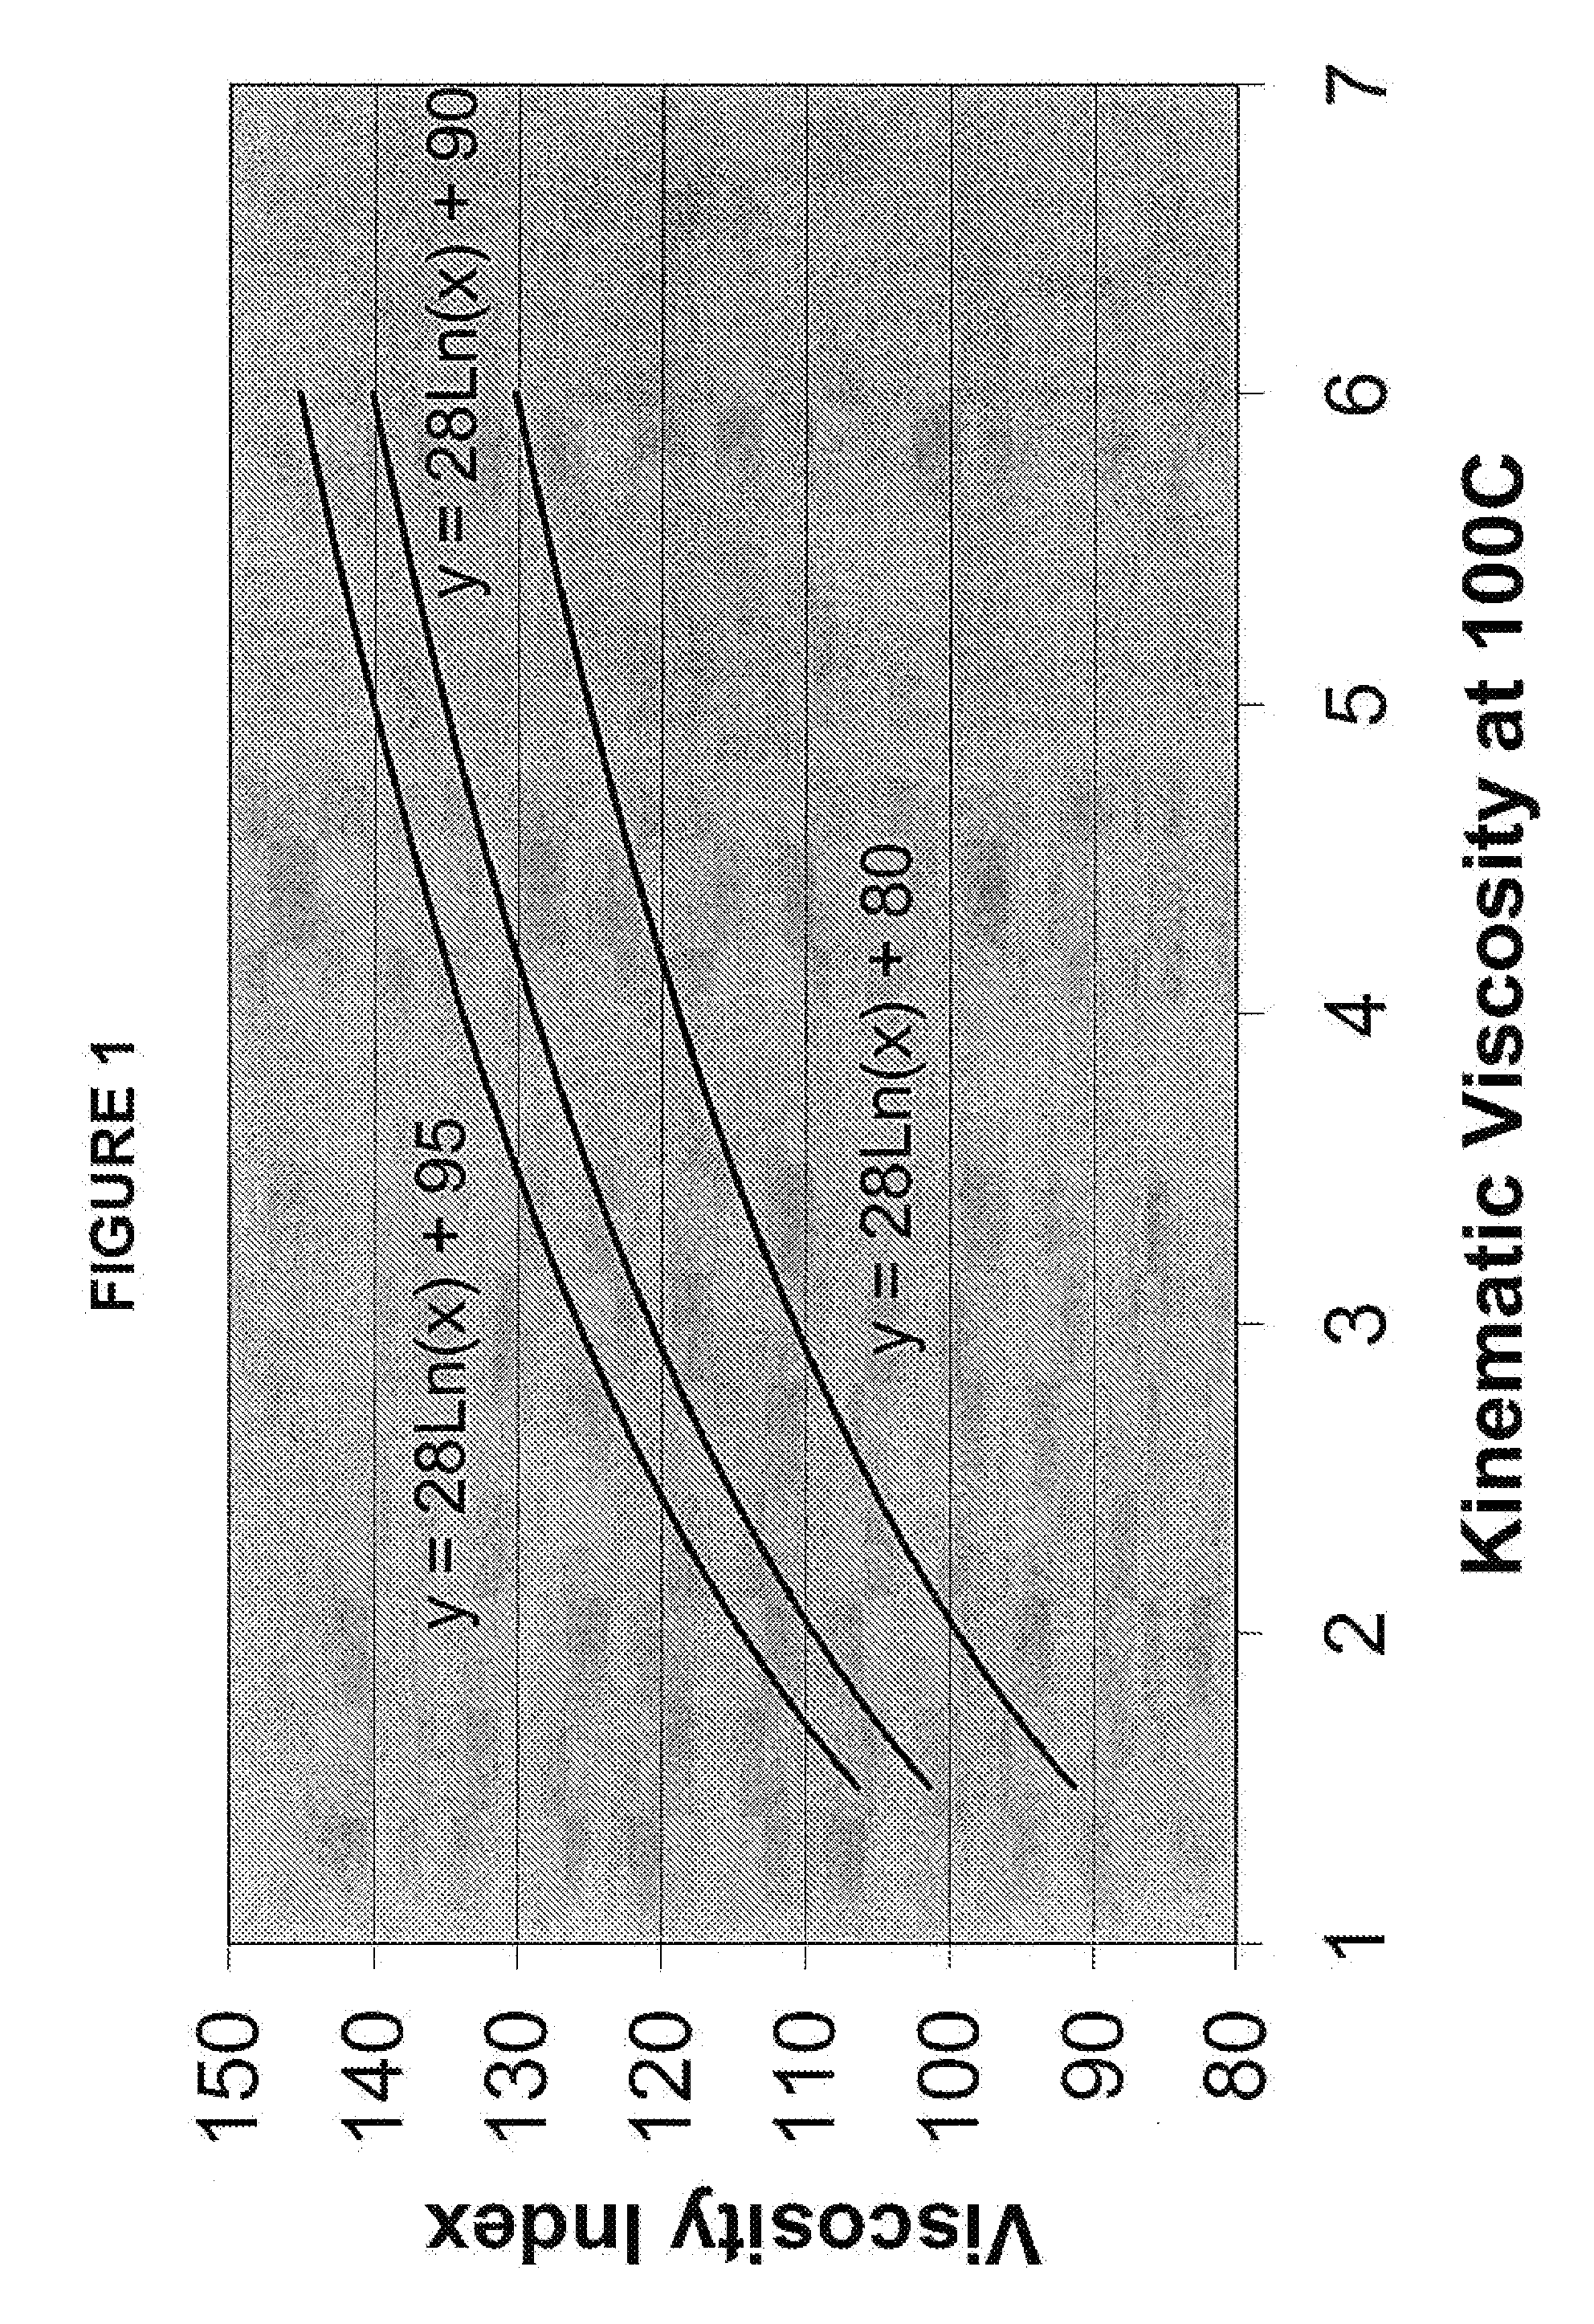 Functional fluid compositions